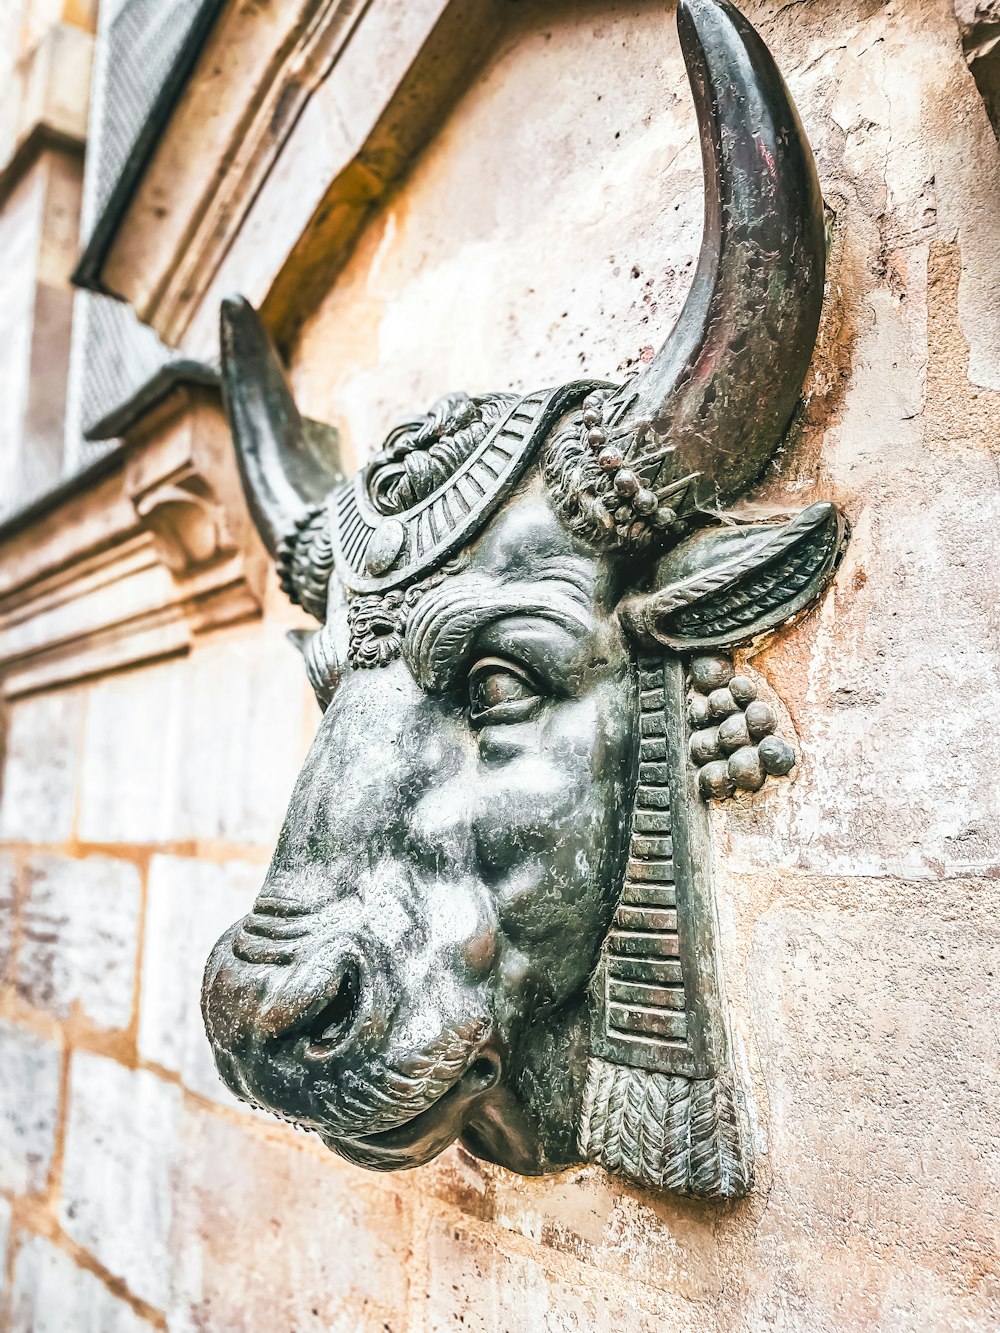 a statue of a bull's head on the side of a building